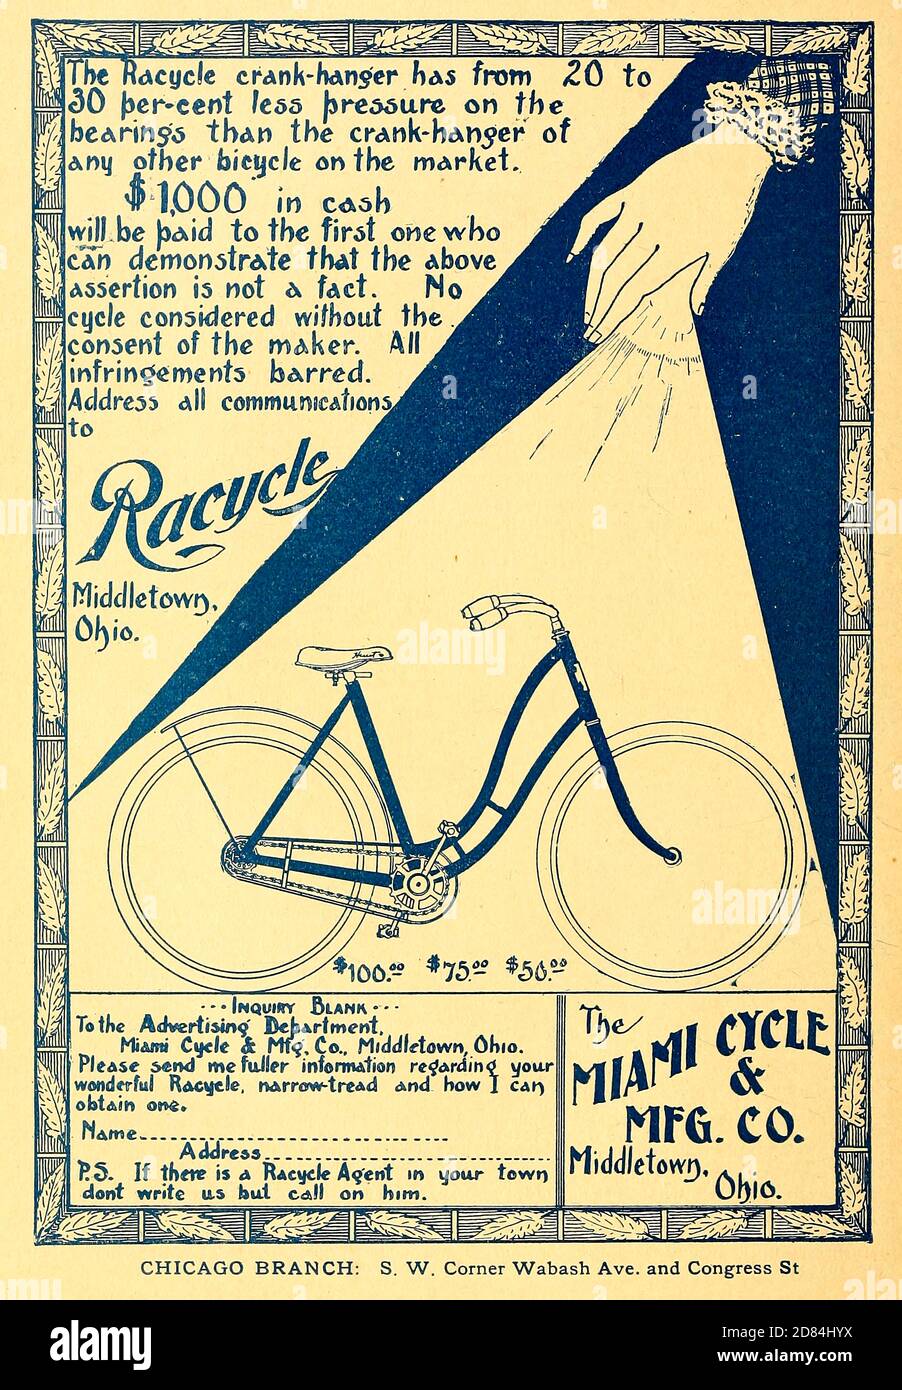 Ad for Racycle Bicycles Manufactured by the Miami Cycling and MFG and Co. from Middletown Ohio. Appeared in a monthly magazine called 'Birds : illustrated by color photography' a monthly serial. Knowledge of Bird-life in 1897. Stock Photo